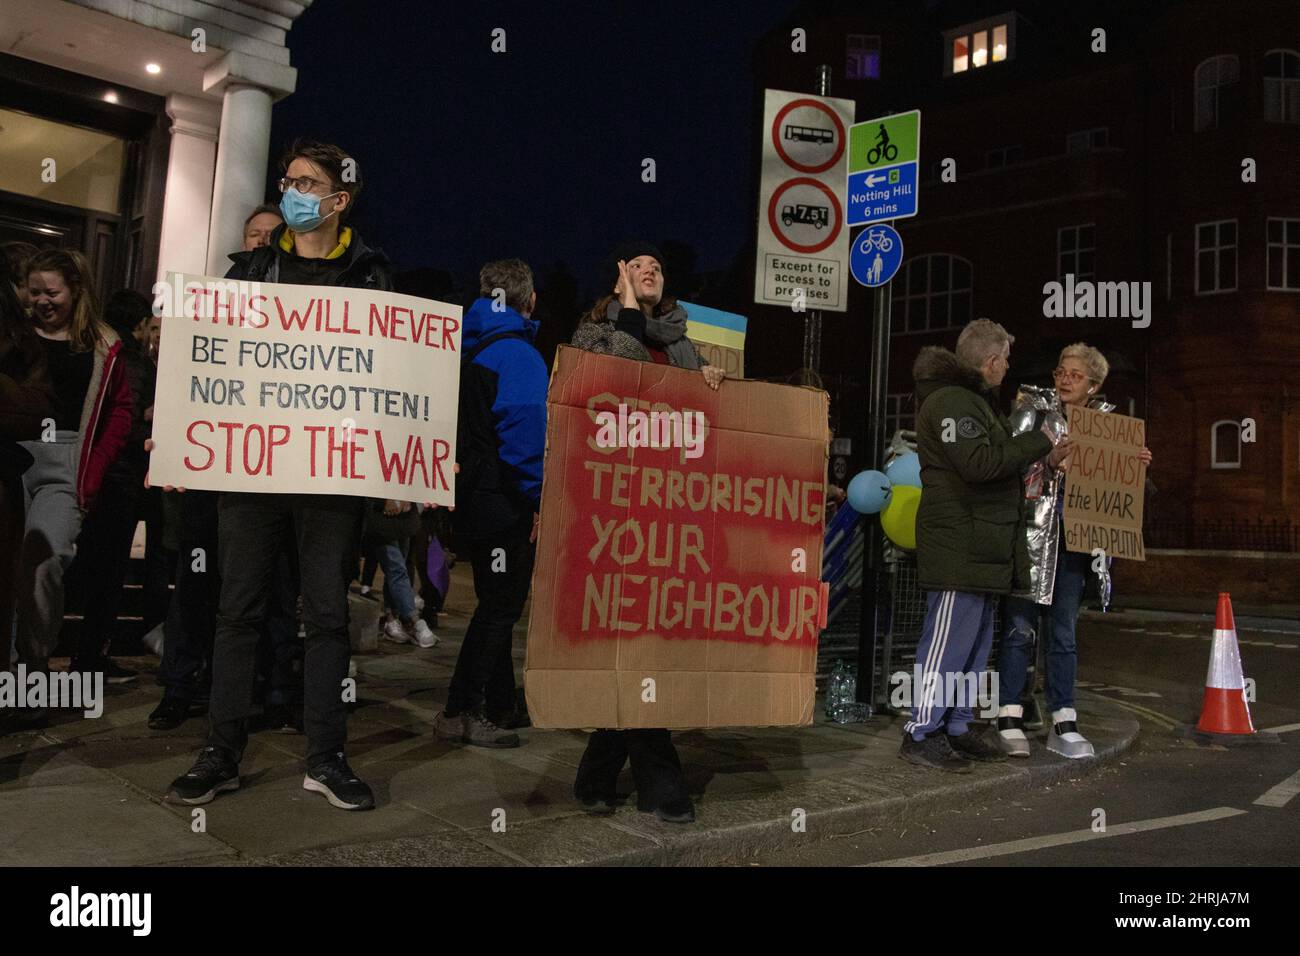 London, UK, 25th Feb 2022 Protesters outside the Russian Embassy at night, following the recent attack on the Ukraine by Russia. Credit: Kiki Streitberger/Alamy Live News Credit: Kiki Streitberger/Alamy Live News Stock Photo